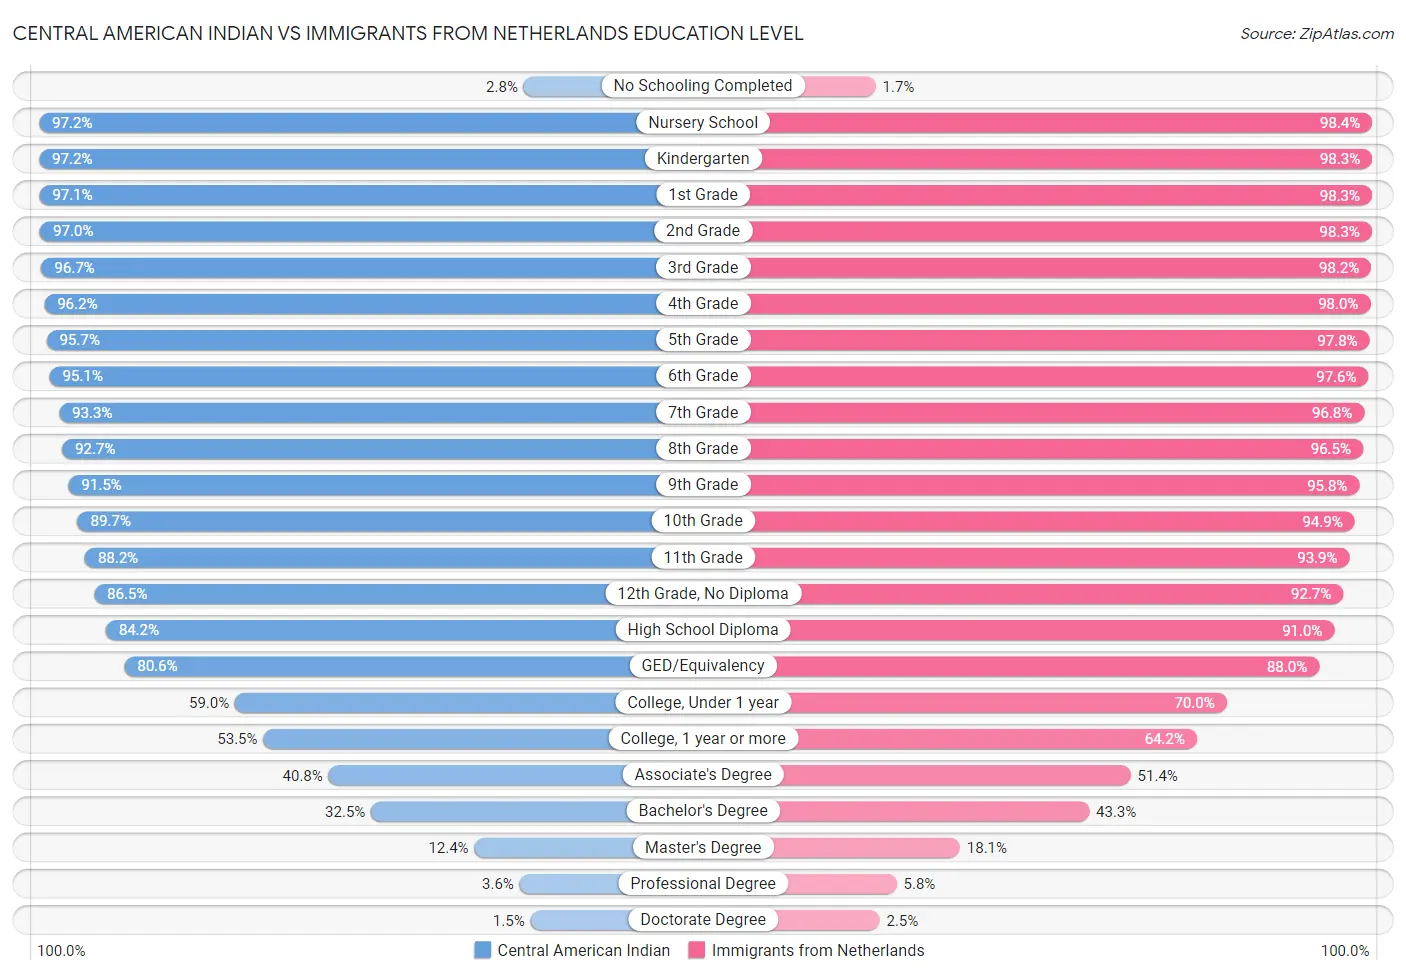 Central American Indian vs Immigrants from Netherlands Education Level